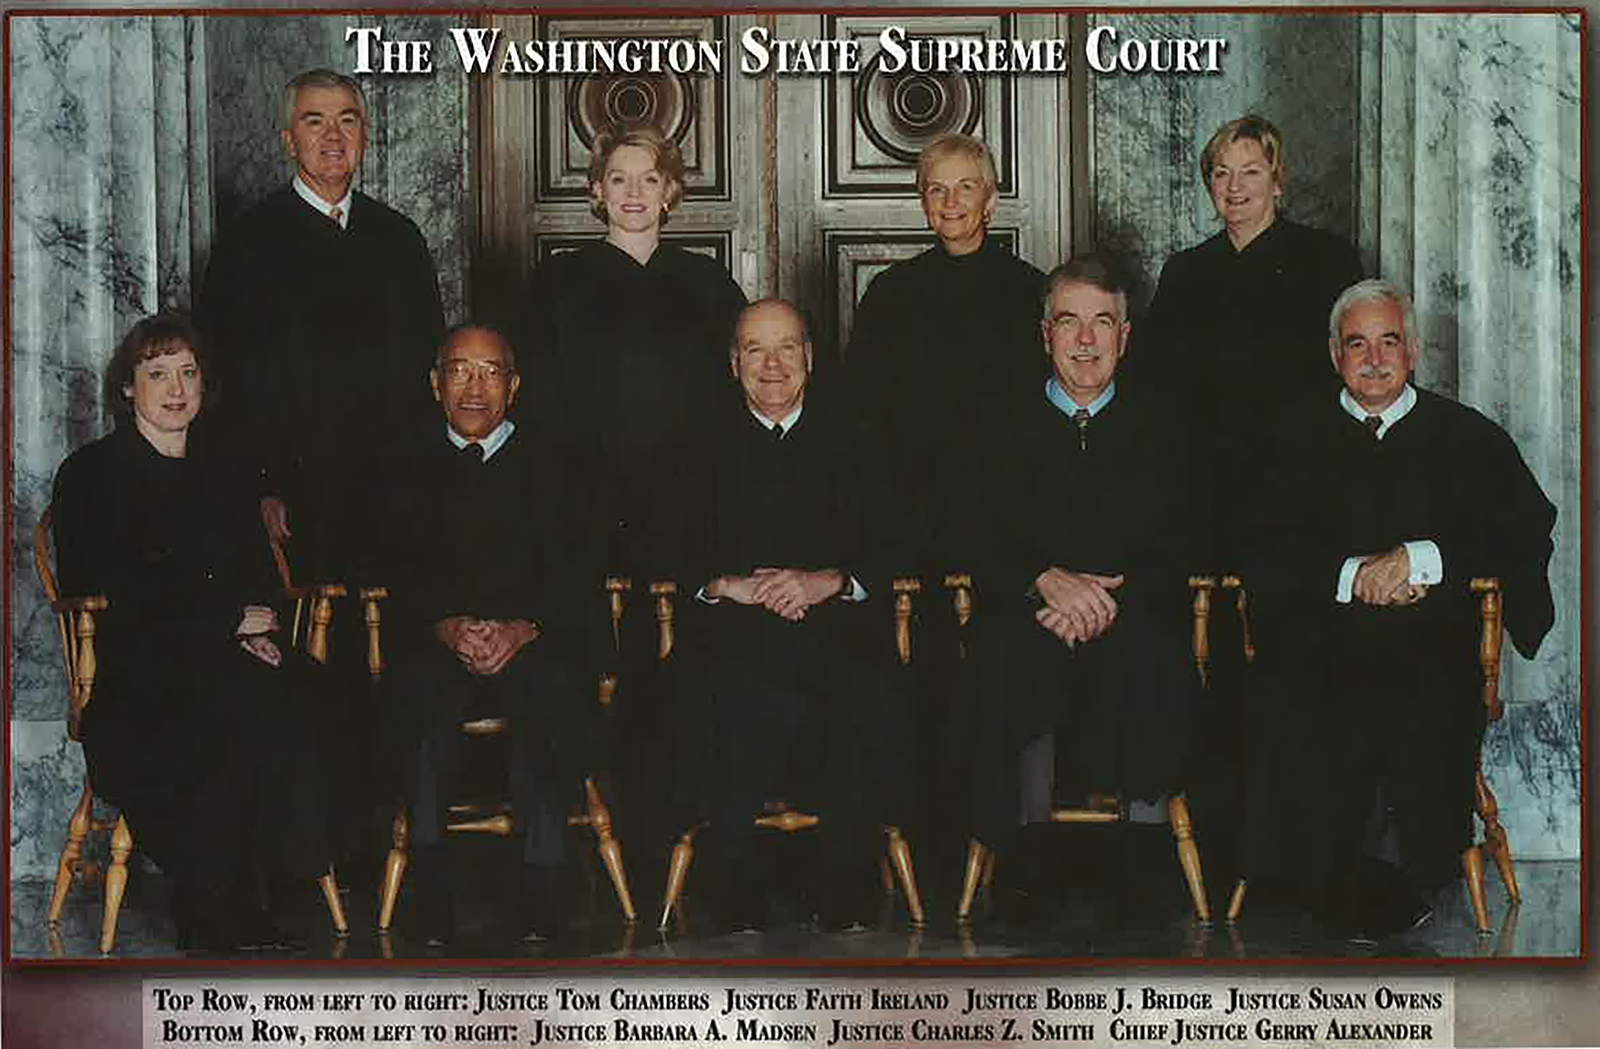 Justice Bridge and the other members of the Washington State Supreme Court, 2002.